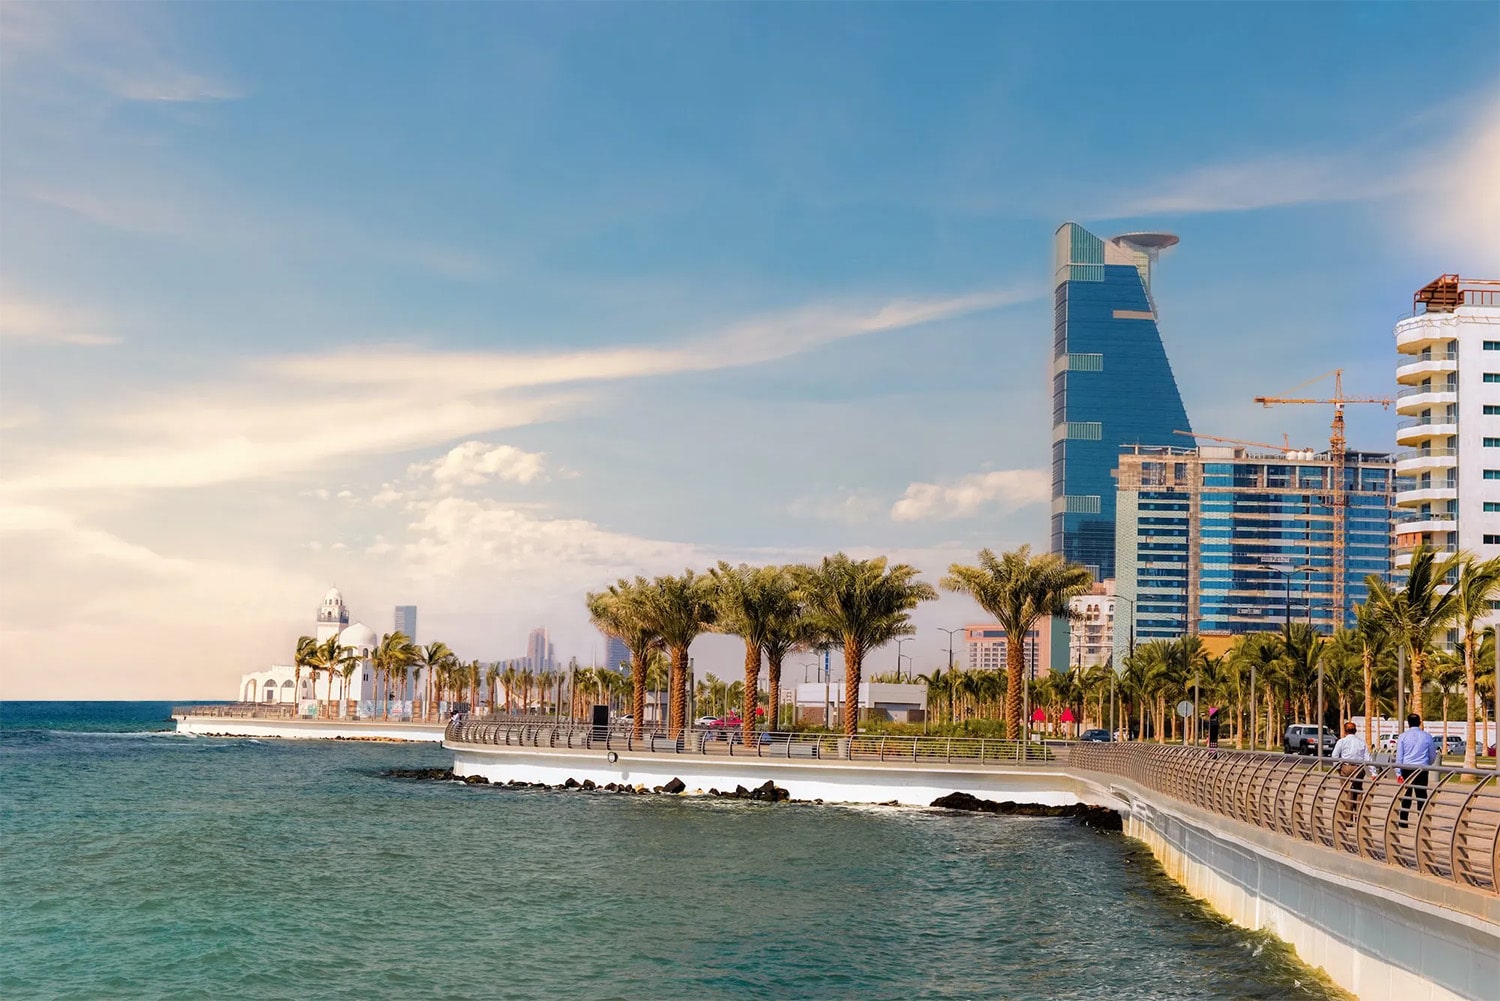 31 interesting facts about Jeddah